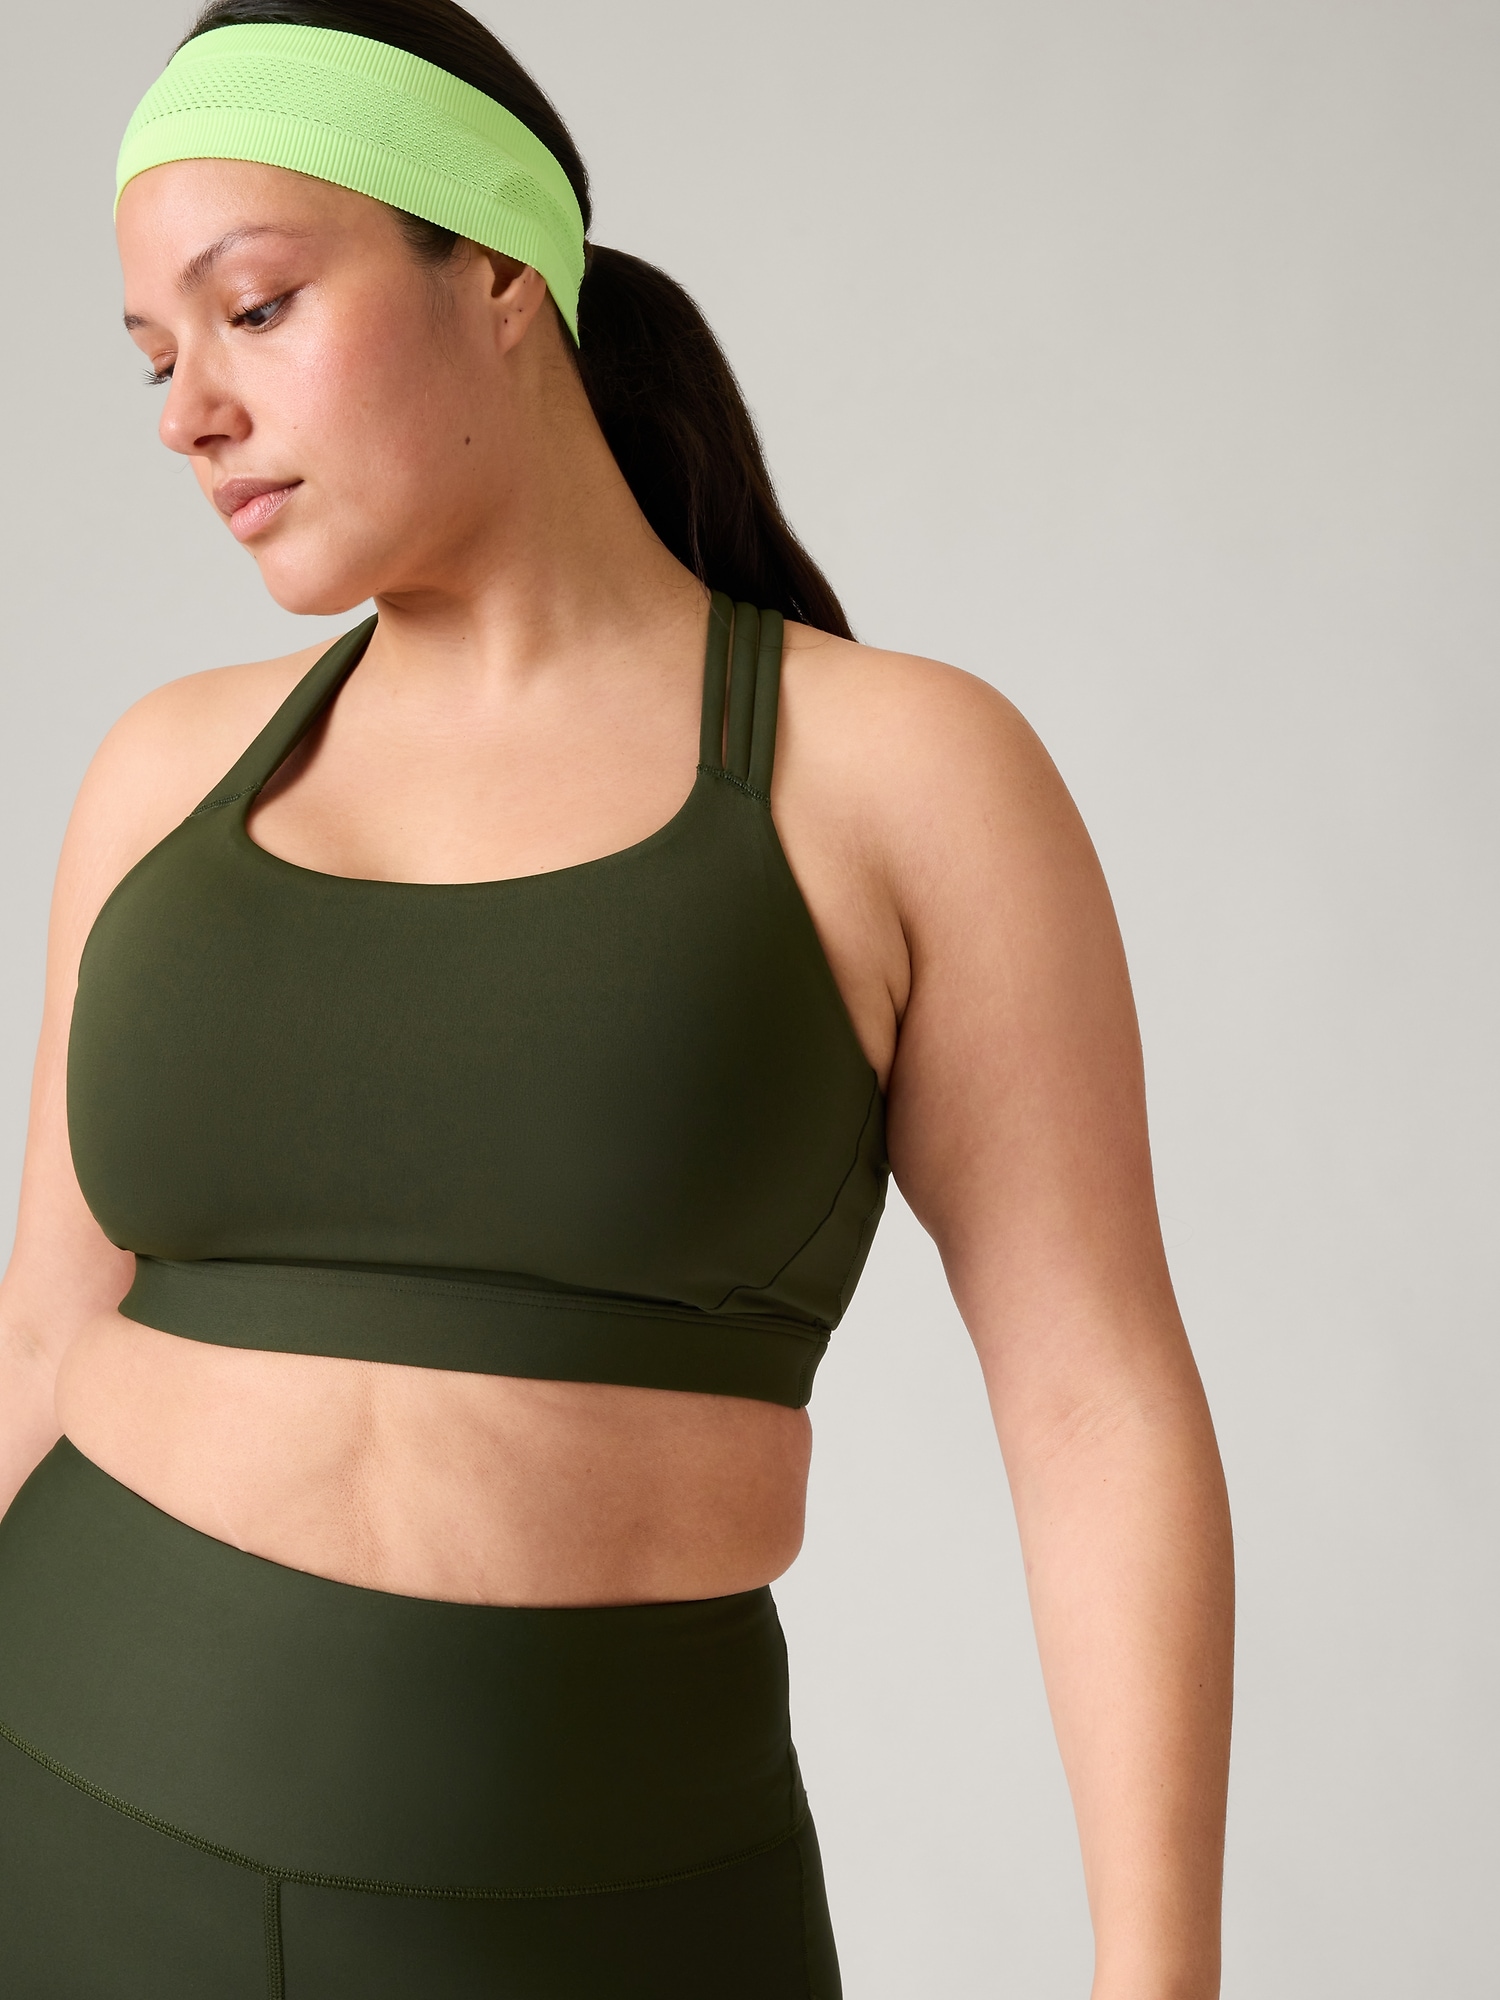 Buy Athleta D-DD+ Cup Strappy Back Low Impact Sports Bra from the Gap  online shop